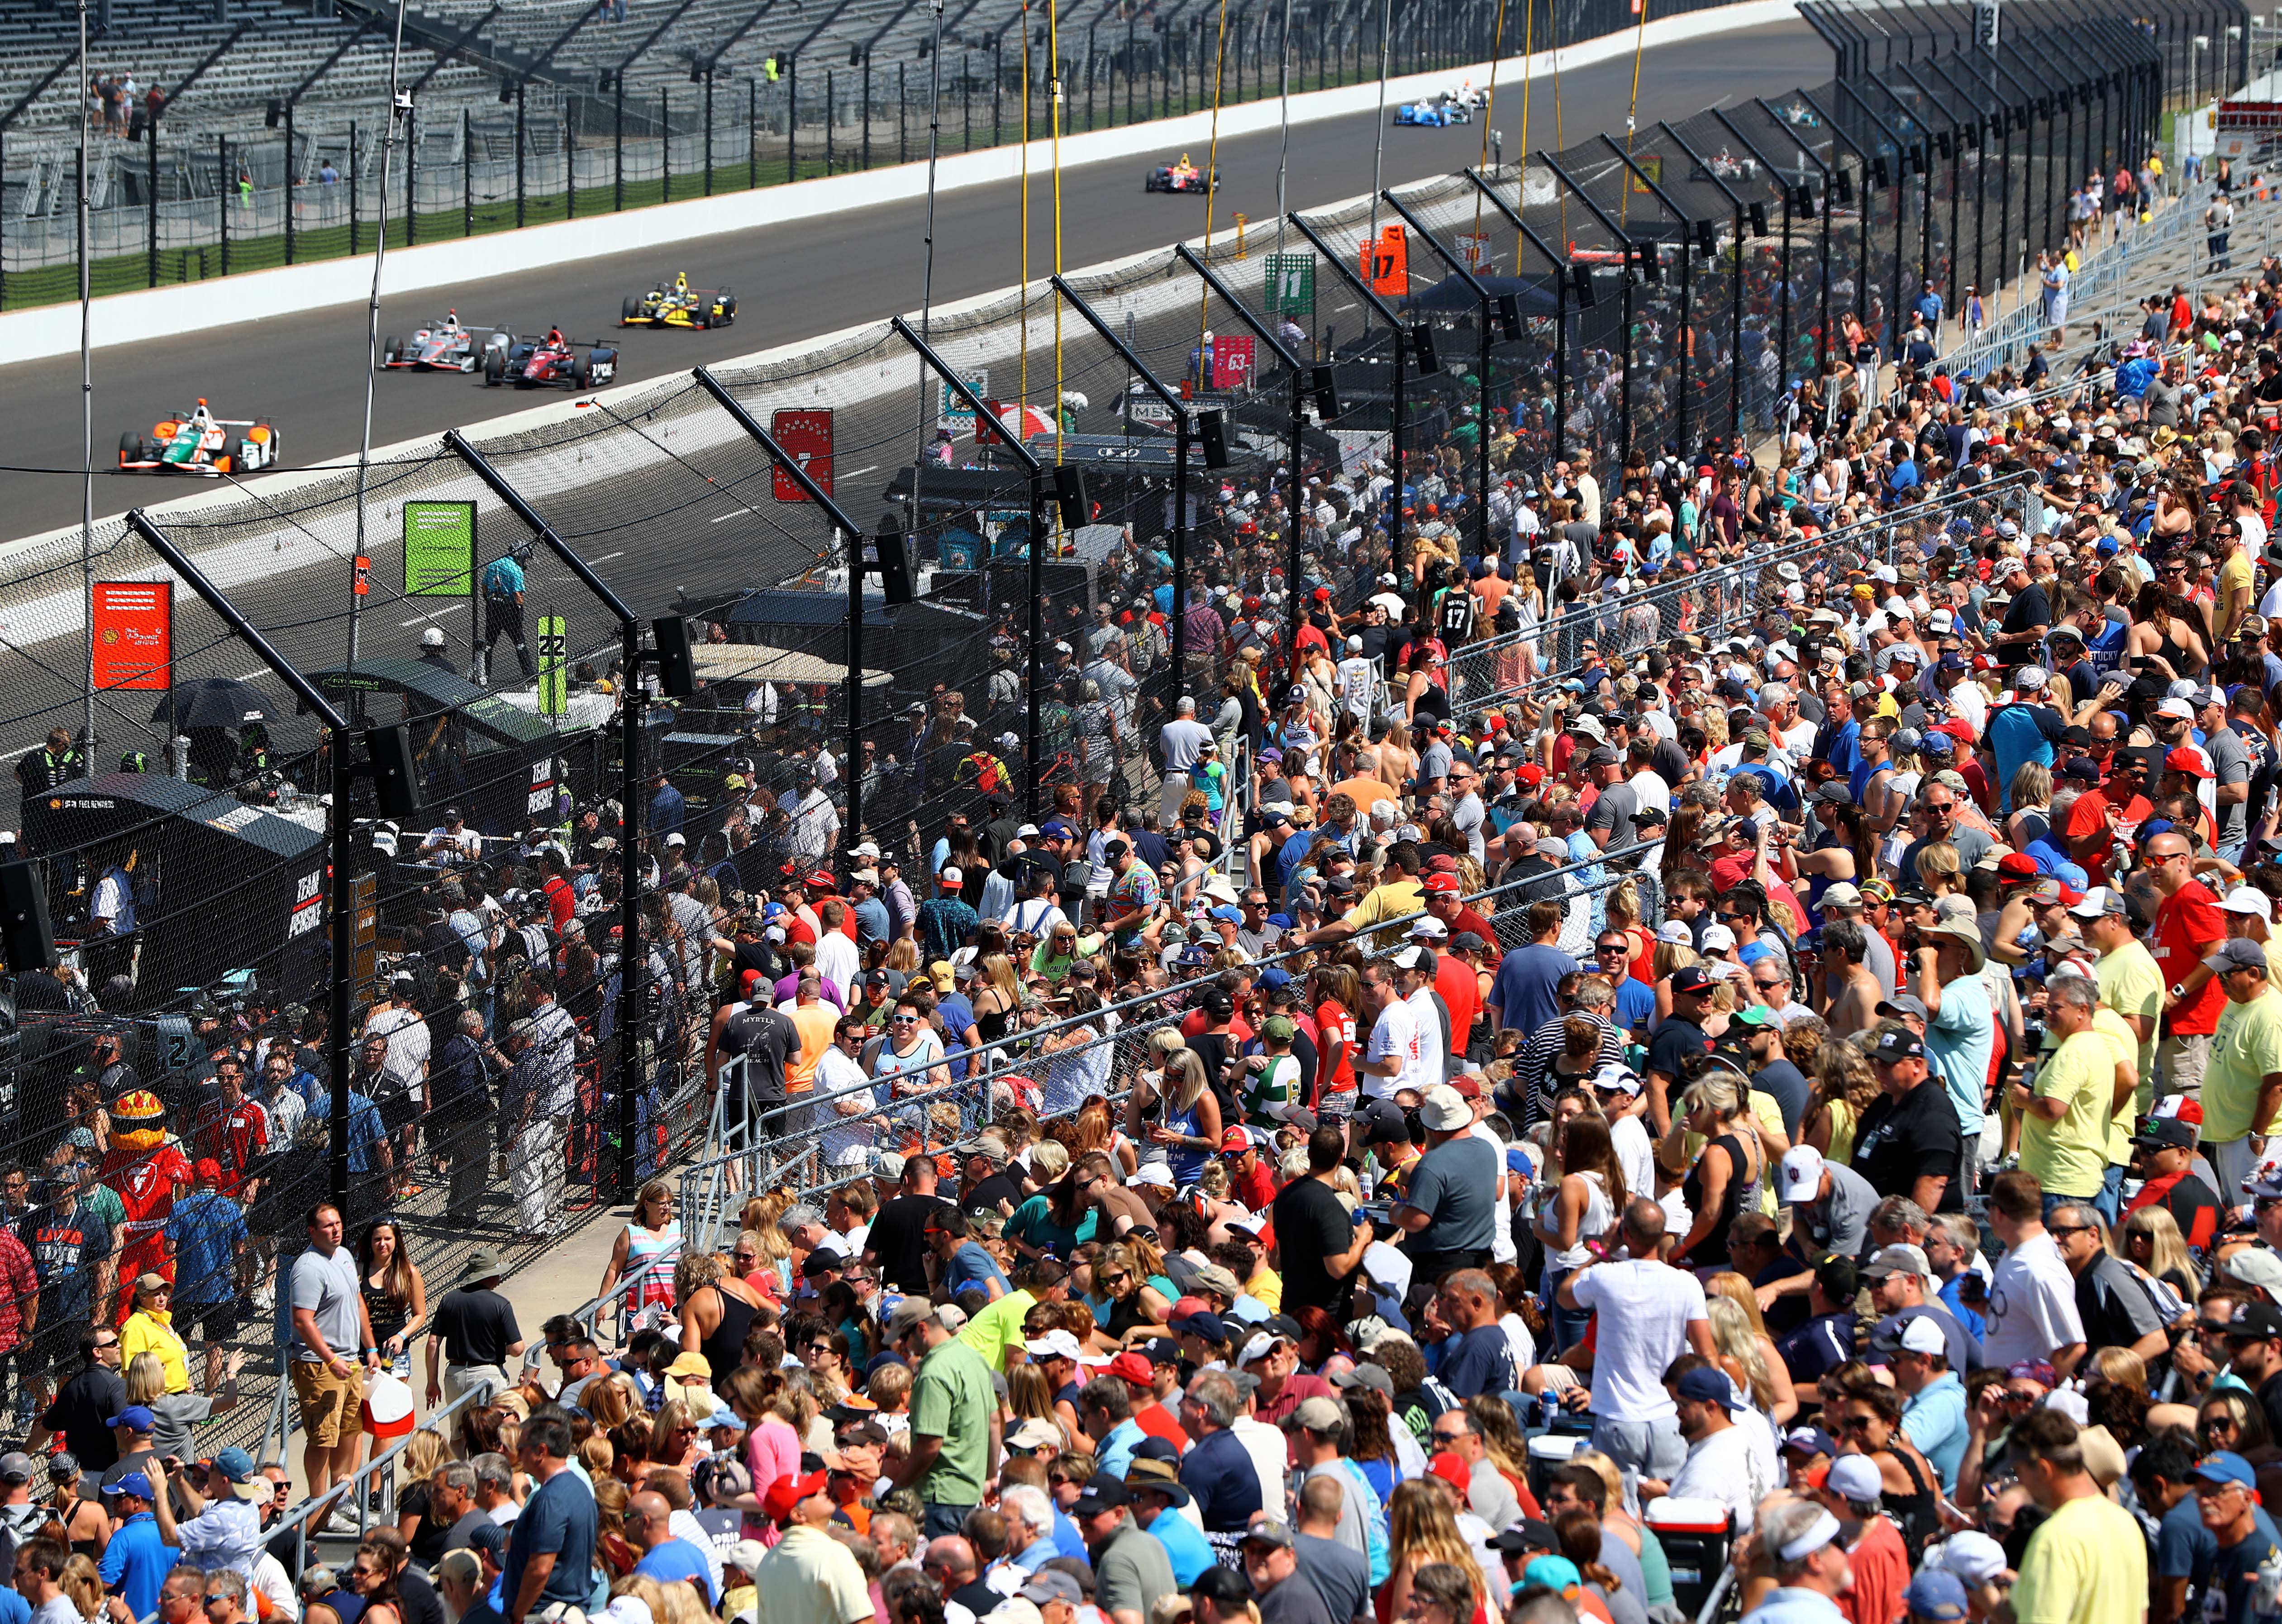 2019 Indy 500 What is Carb Day at Indianapolis Motor Speedway?